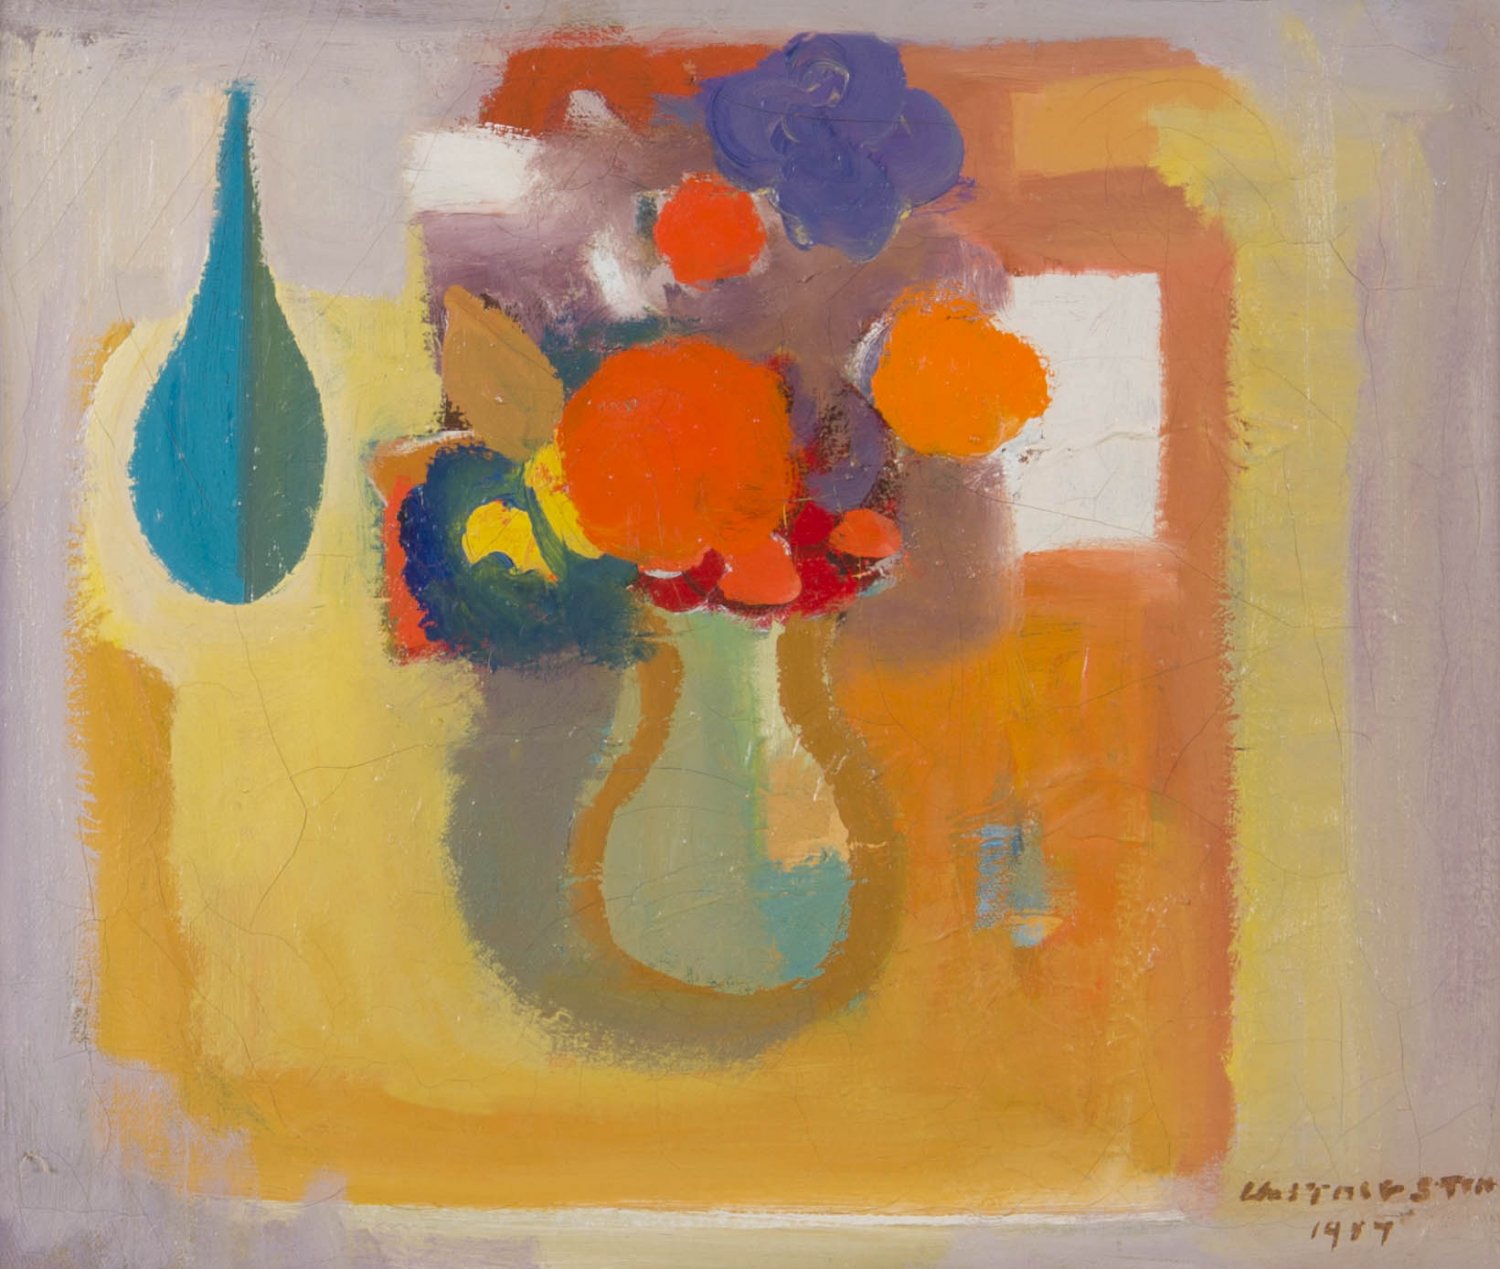 (Flowers and Blue Vase)